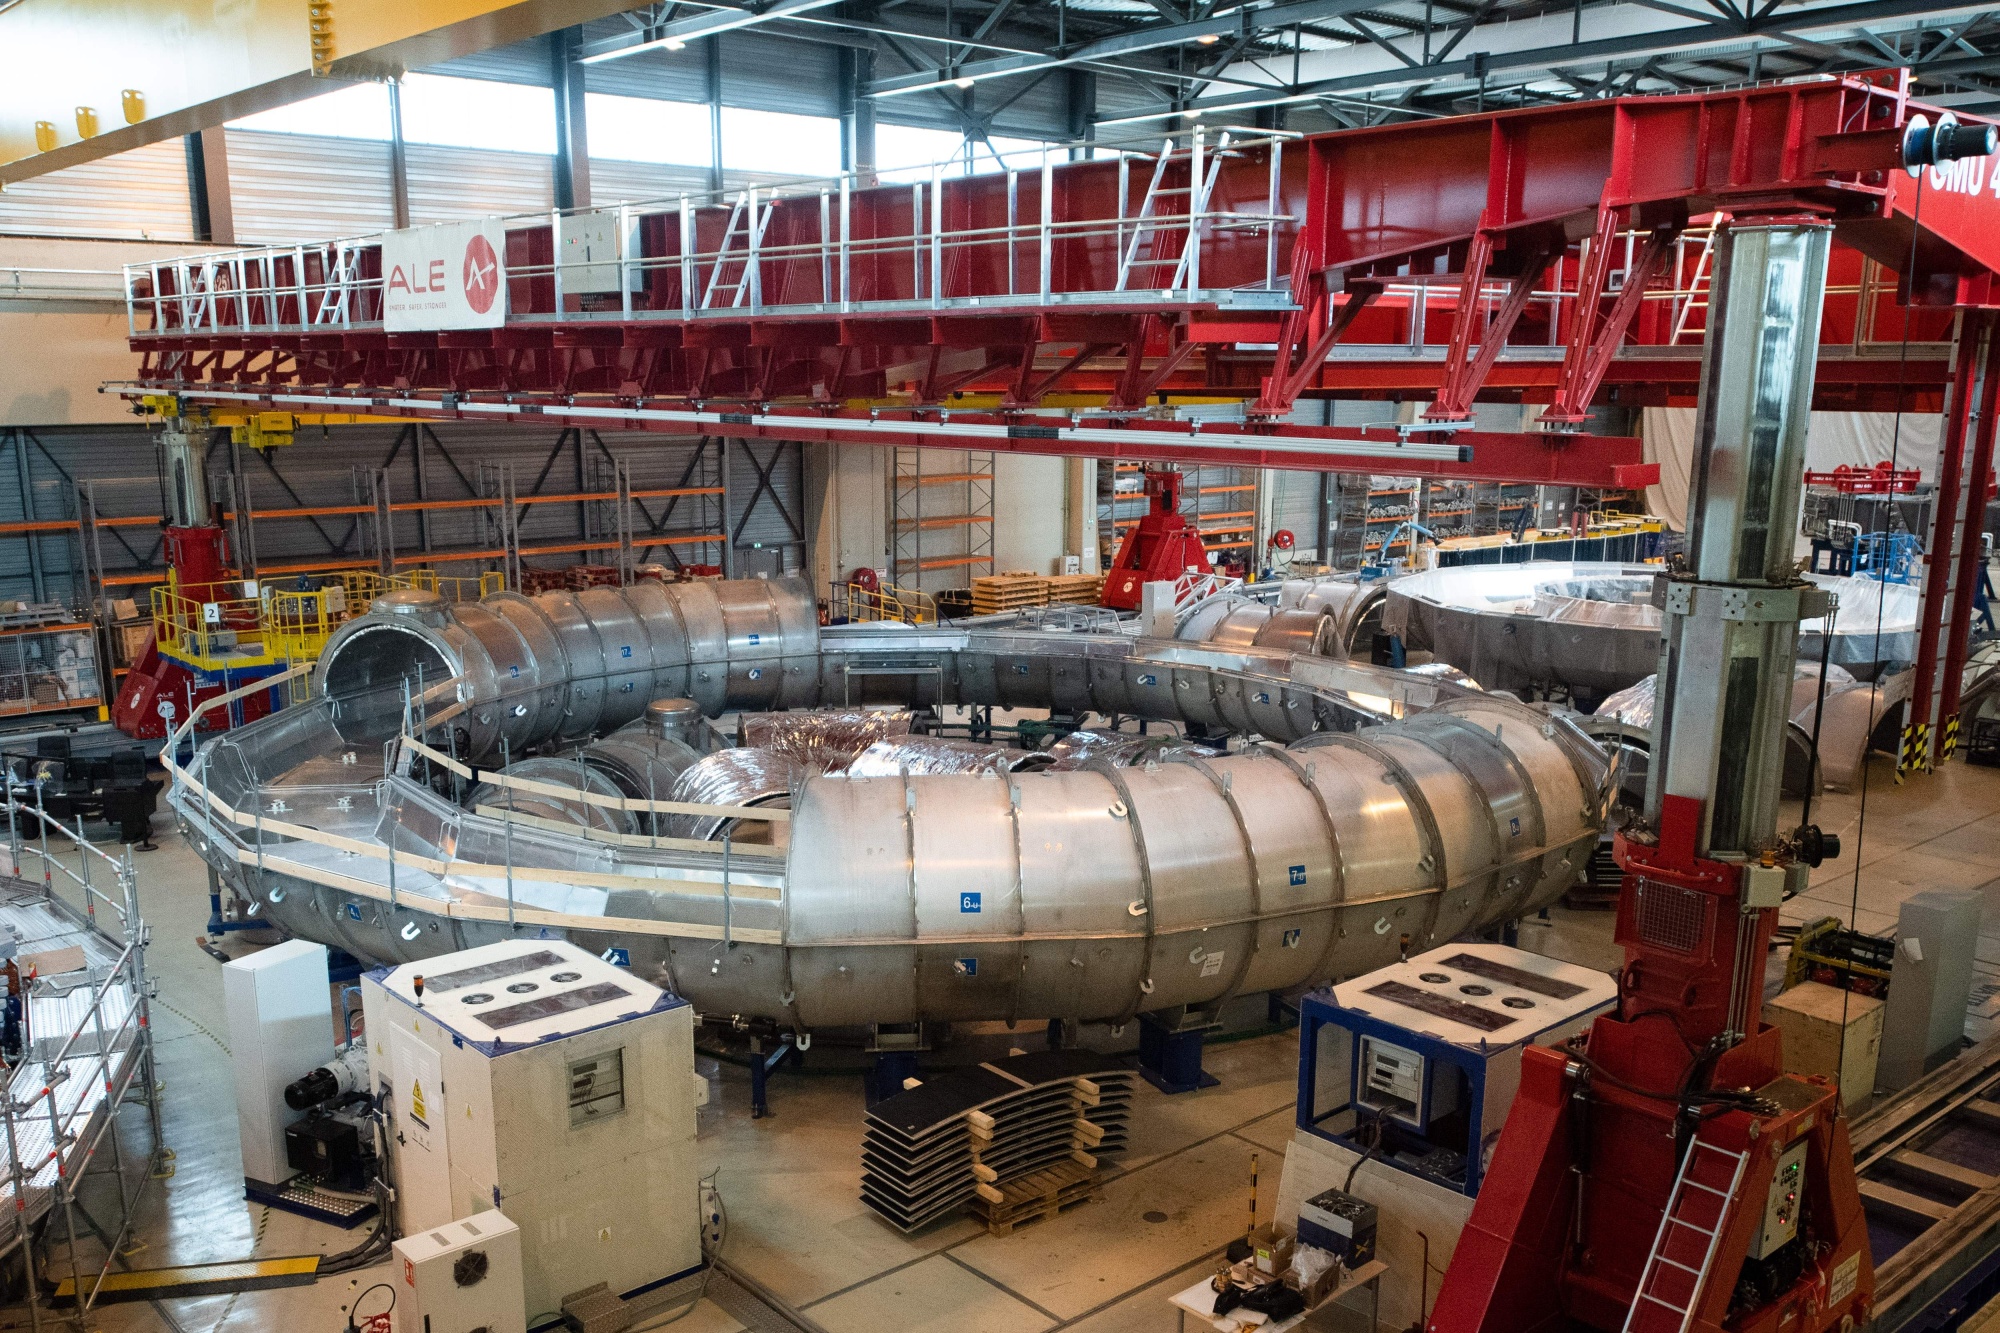 Thirty-five nations are collaborating in the International Thermonuclear Experimental Reactor&nbsp;project&nbsp;(ITER), aimed at mastering energy production from hydrogen fusion,&nbsp;in Saint-Paul-les-Durance, southeastern France.